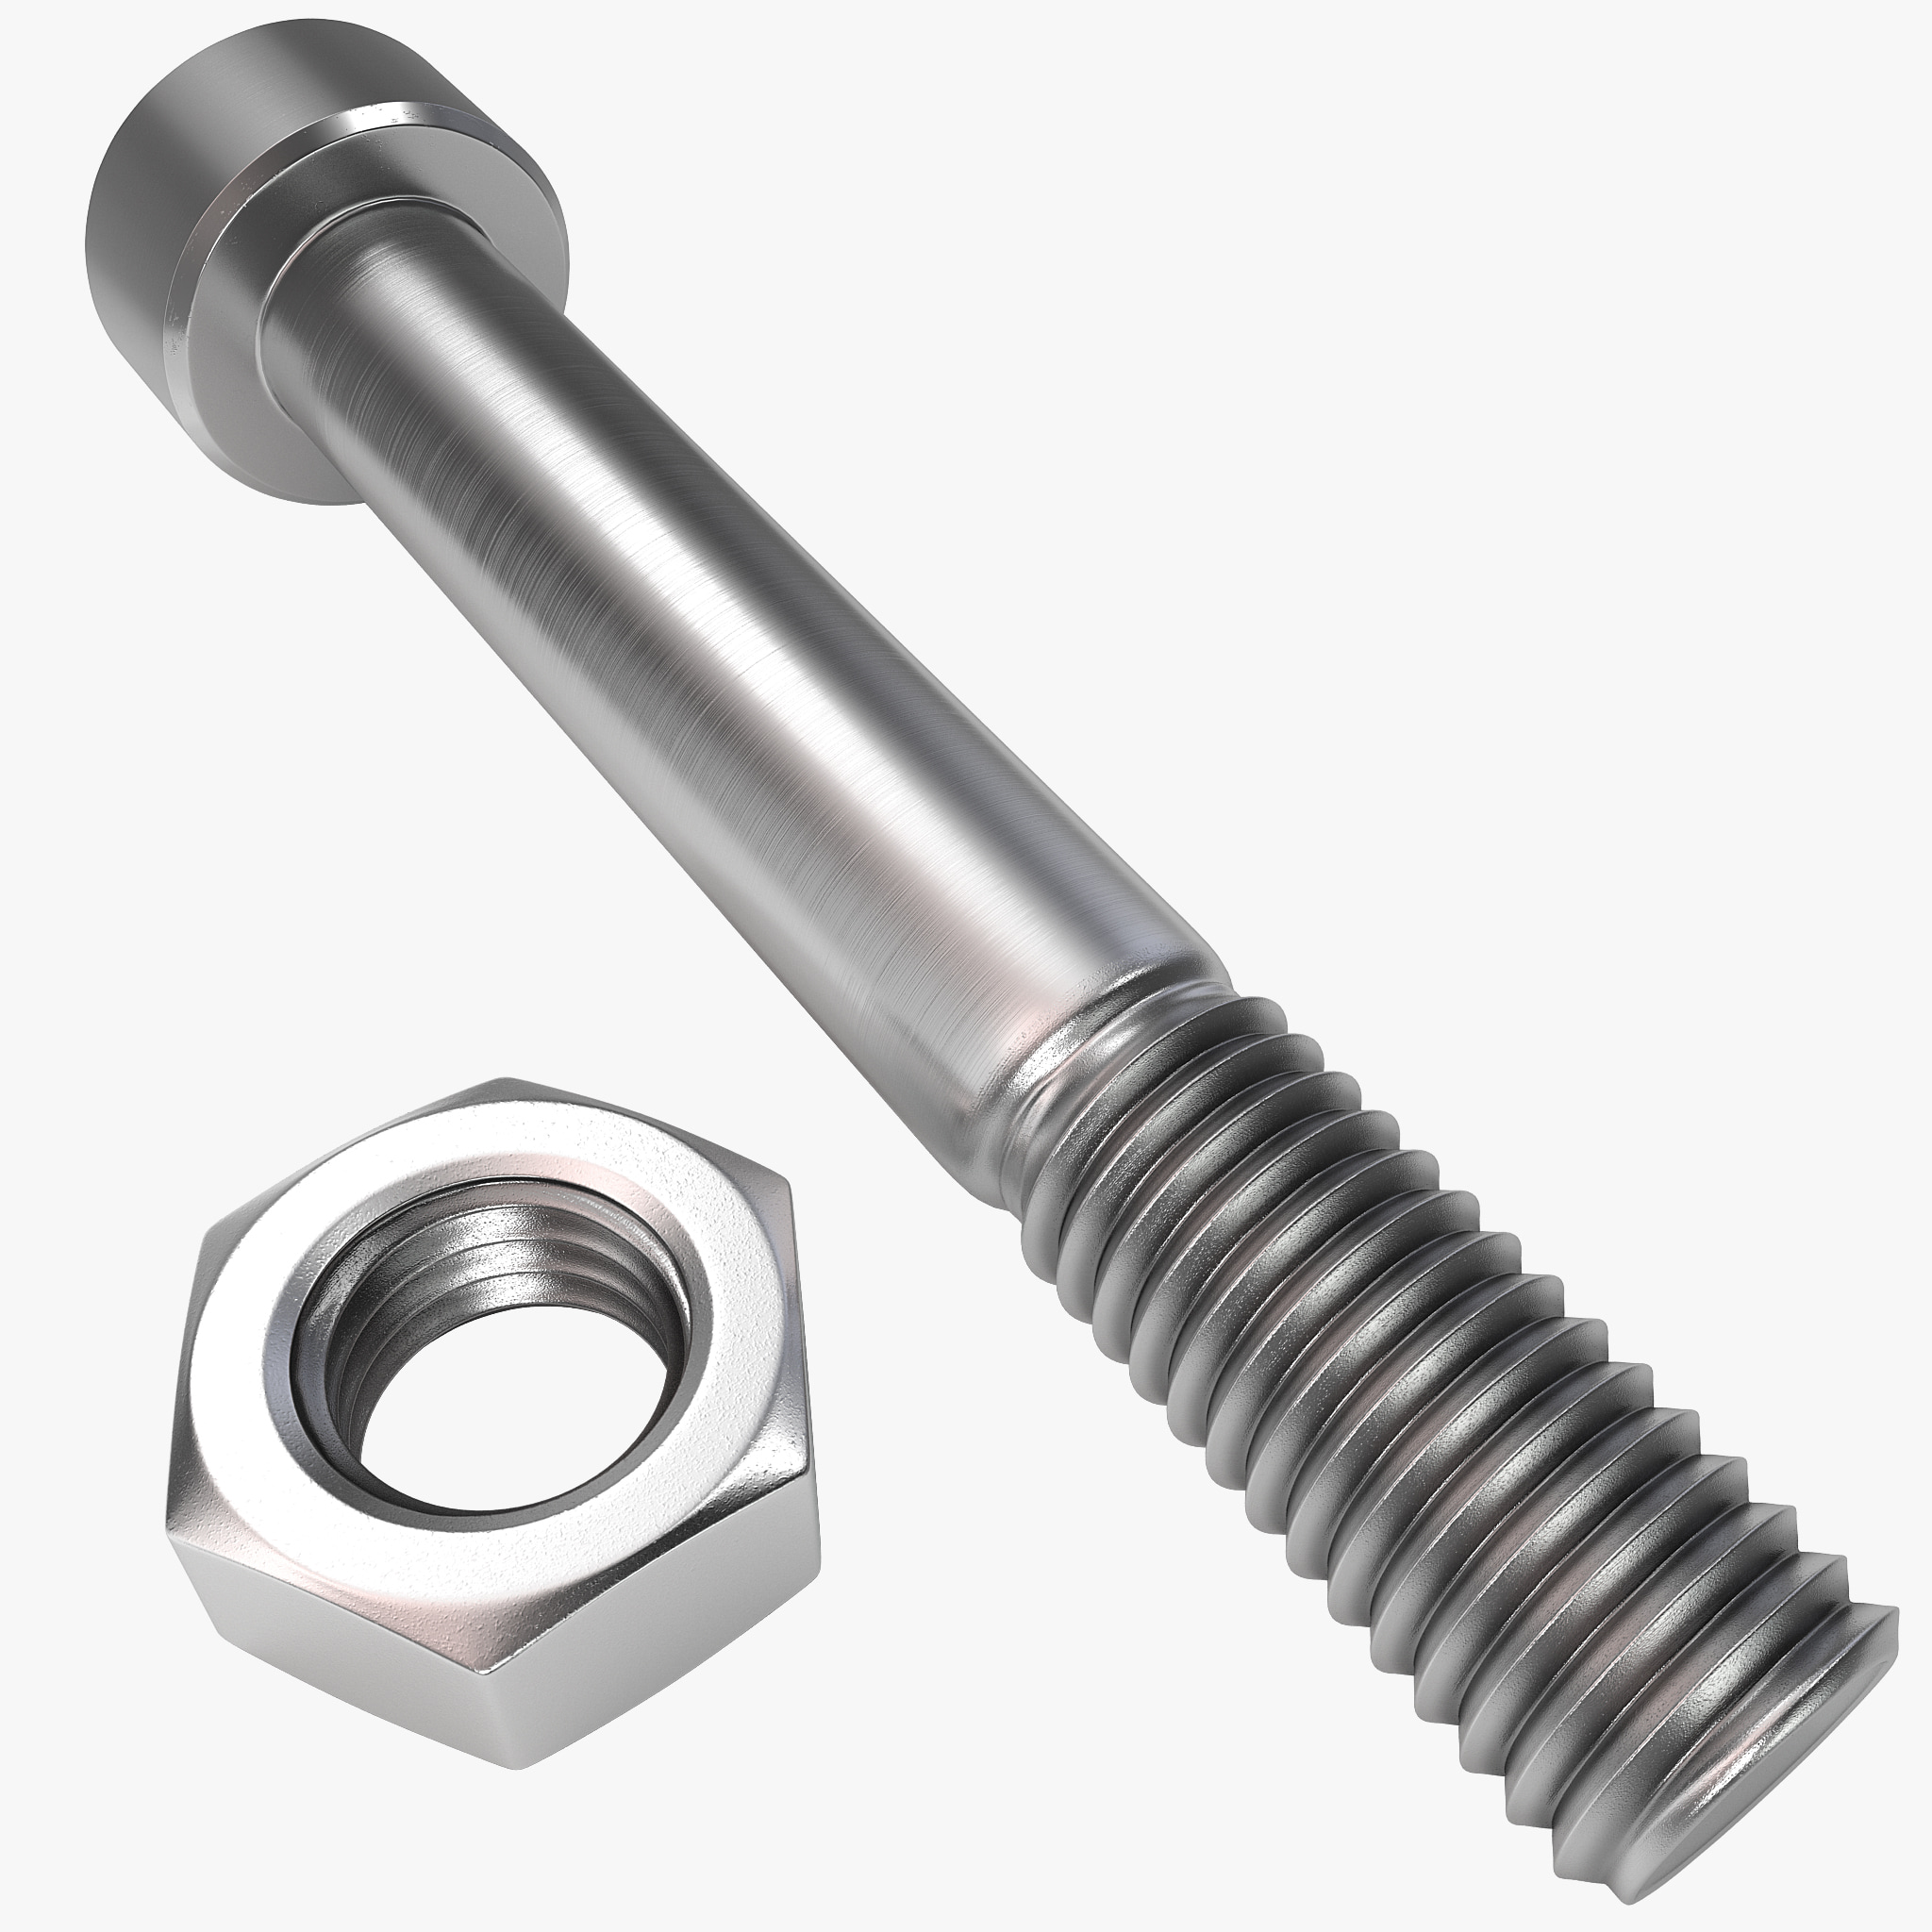 Nut and bolt photo